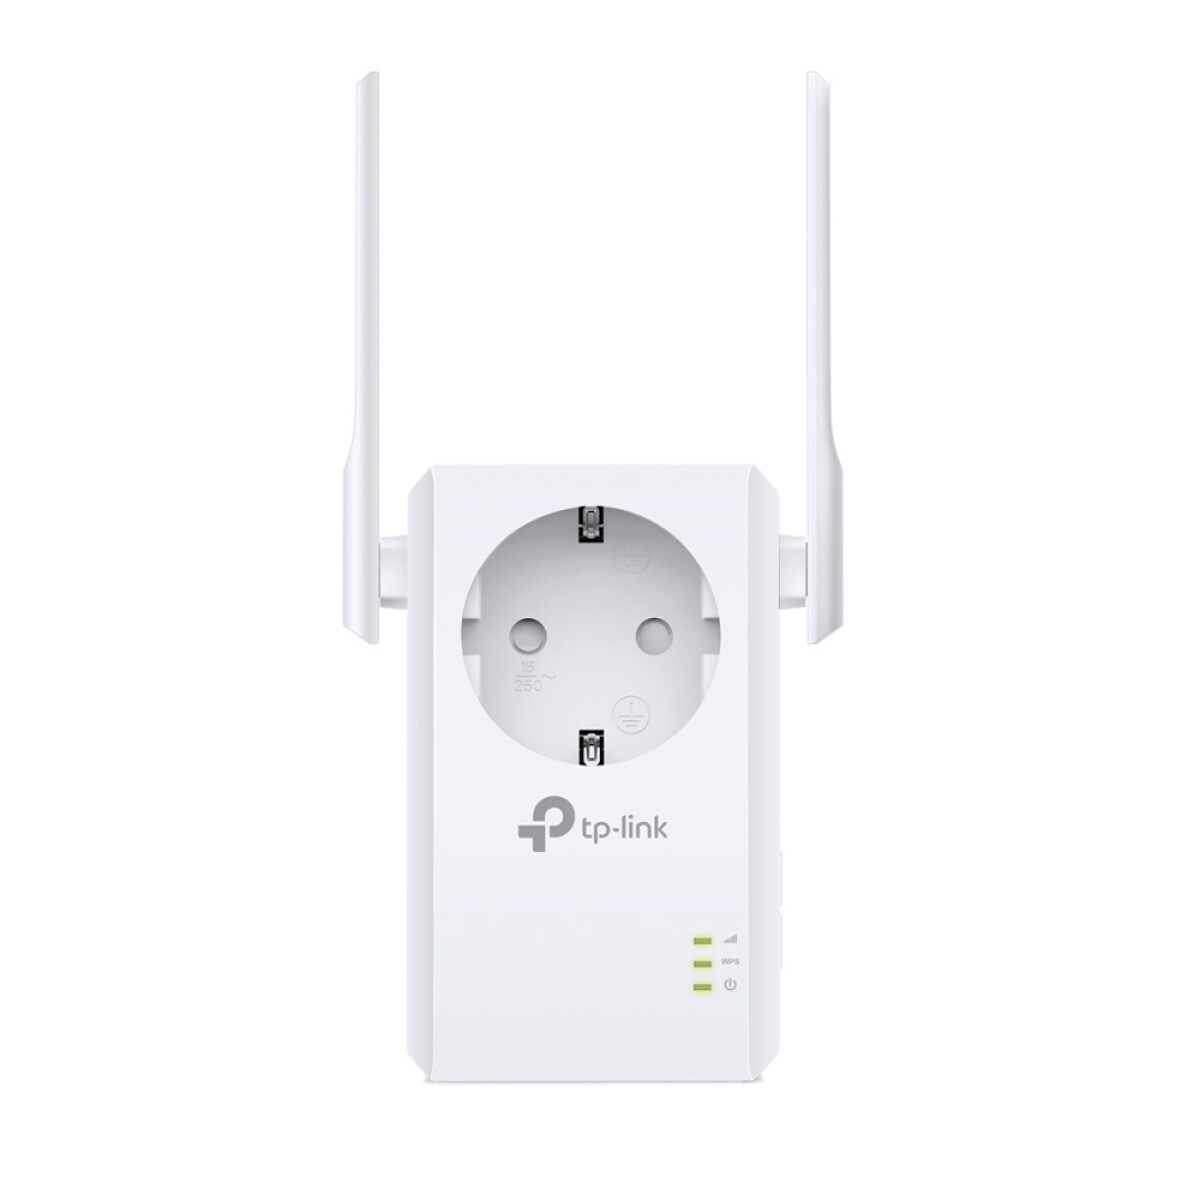 Red Inal - Repetidor 300N TL-WA860RE TP-LINK - 4173 